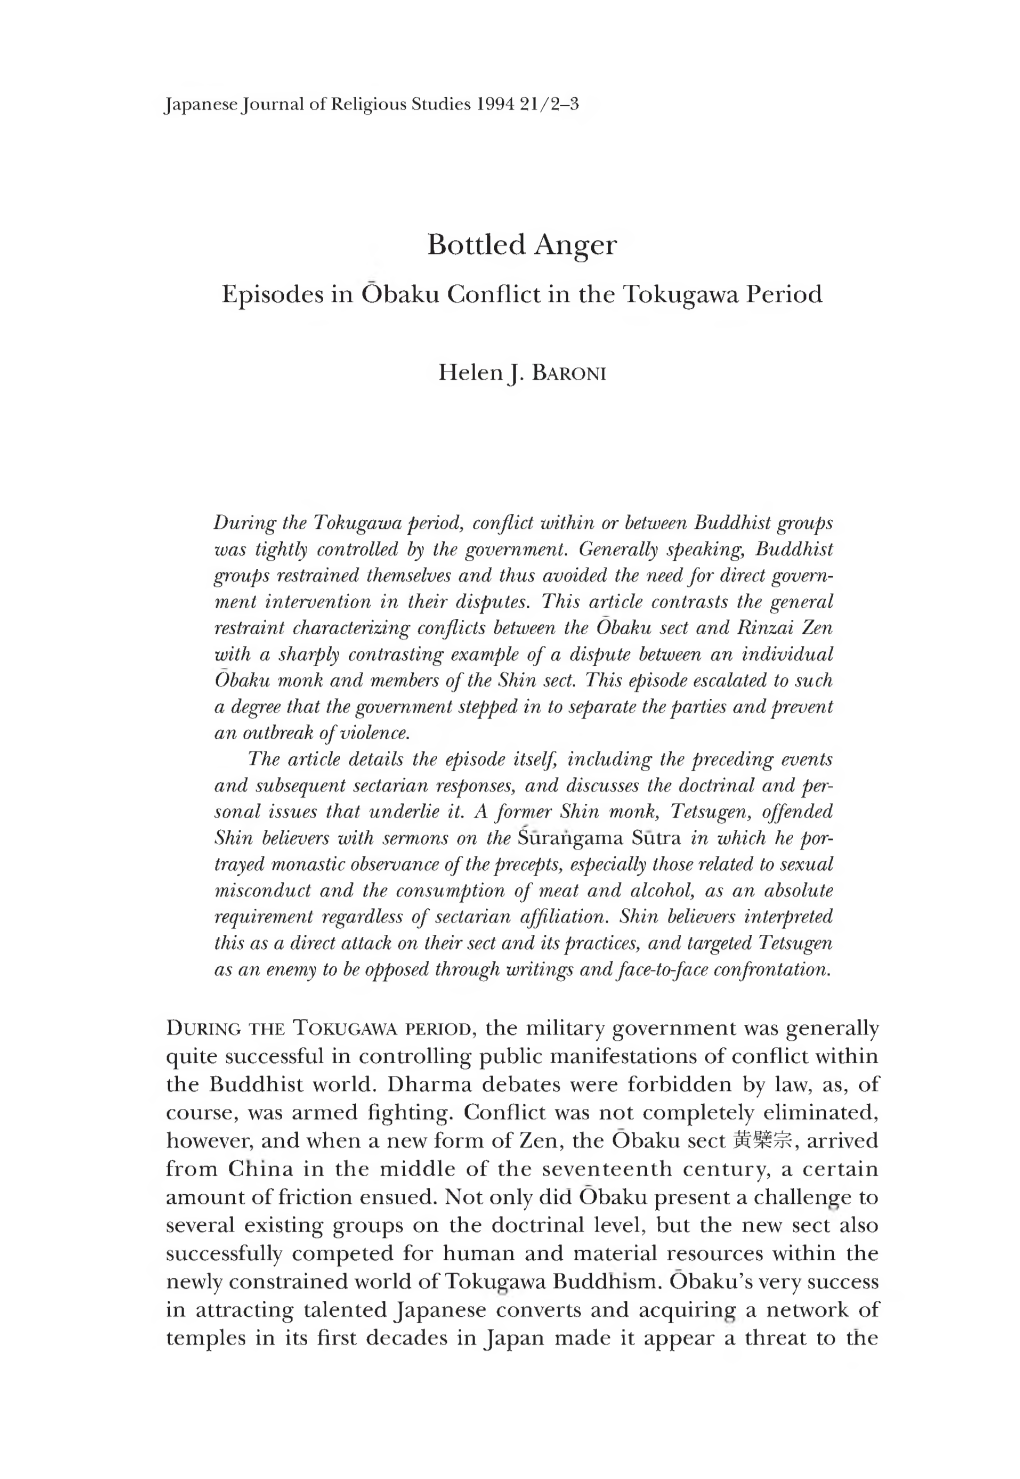 Bottled Anger Episodes in Obaku Conflict in the Tokugawa Period